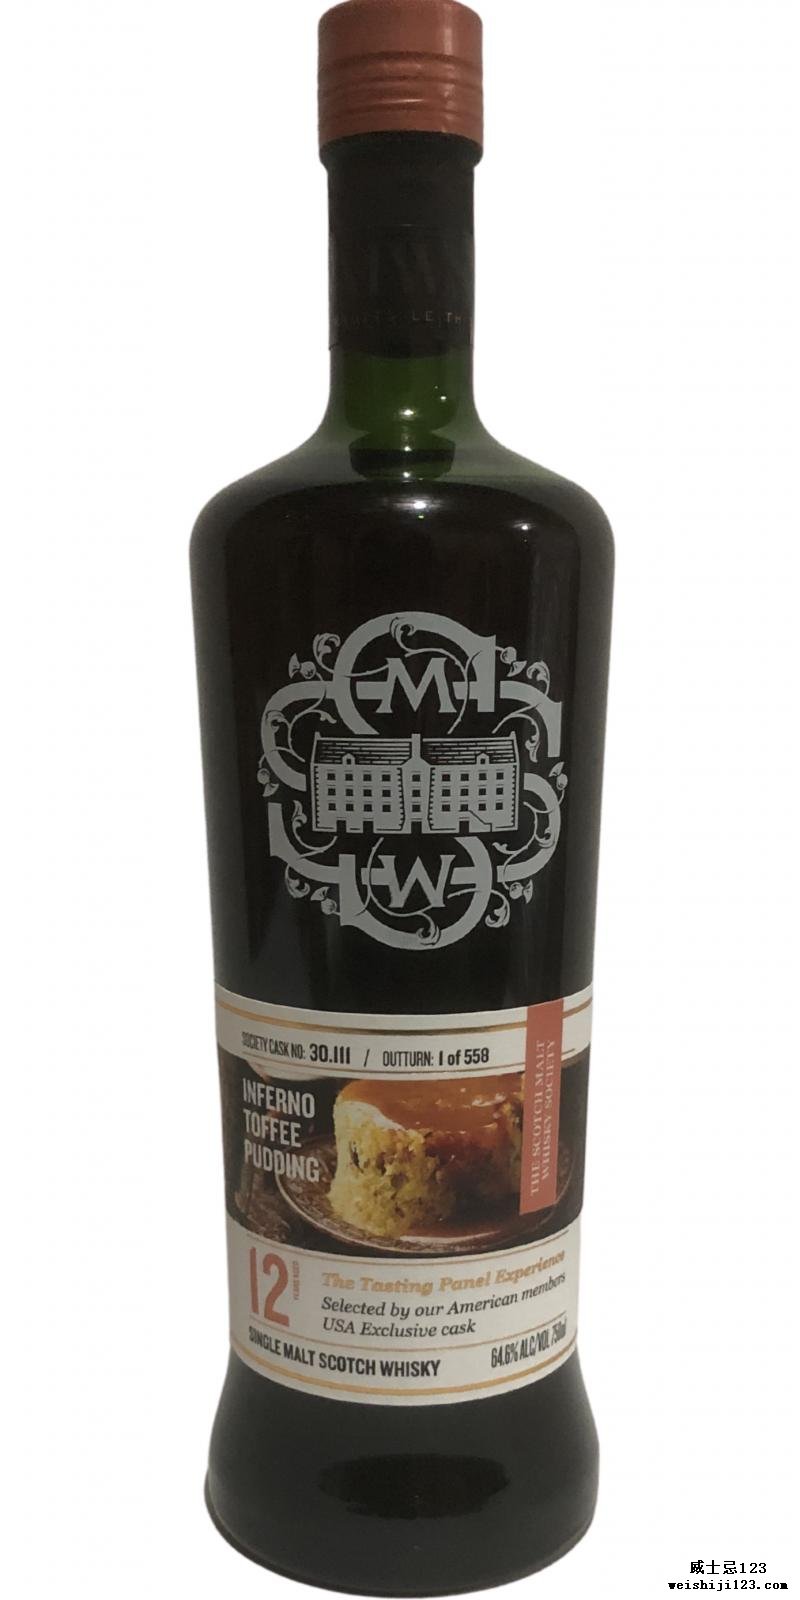 Glenrothes 2007 SMWS 30.111